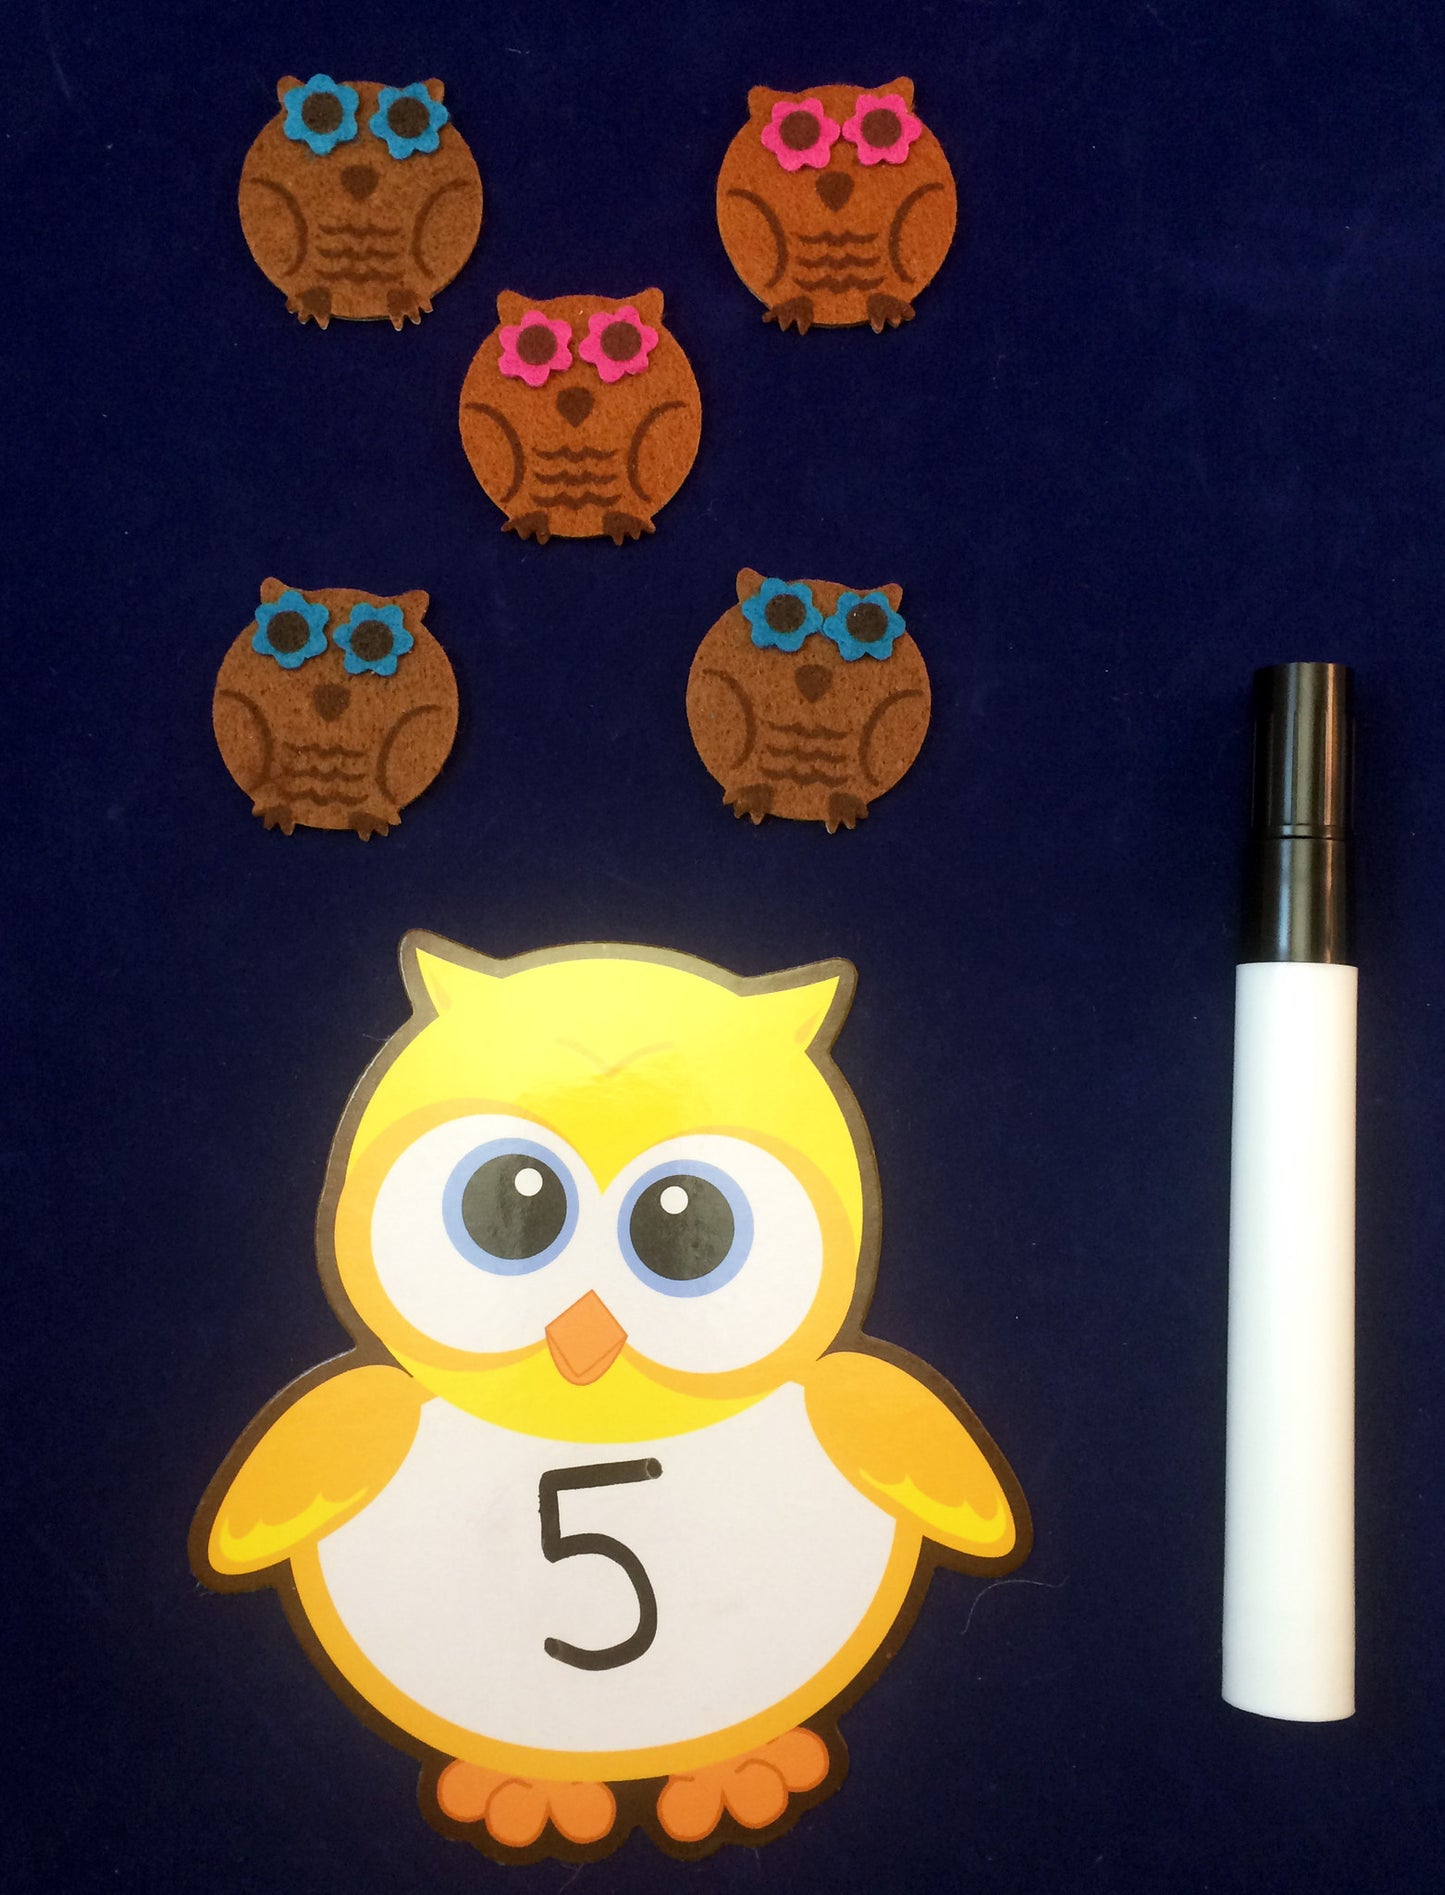 Math Activity - Owl Number Stories using felt owls and owl dry-erase boards inspired by Owl Babies